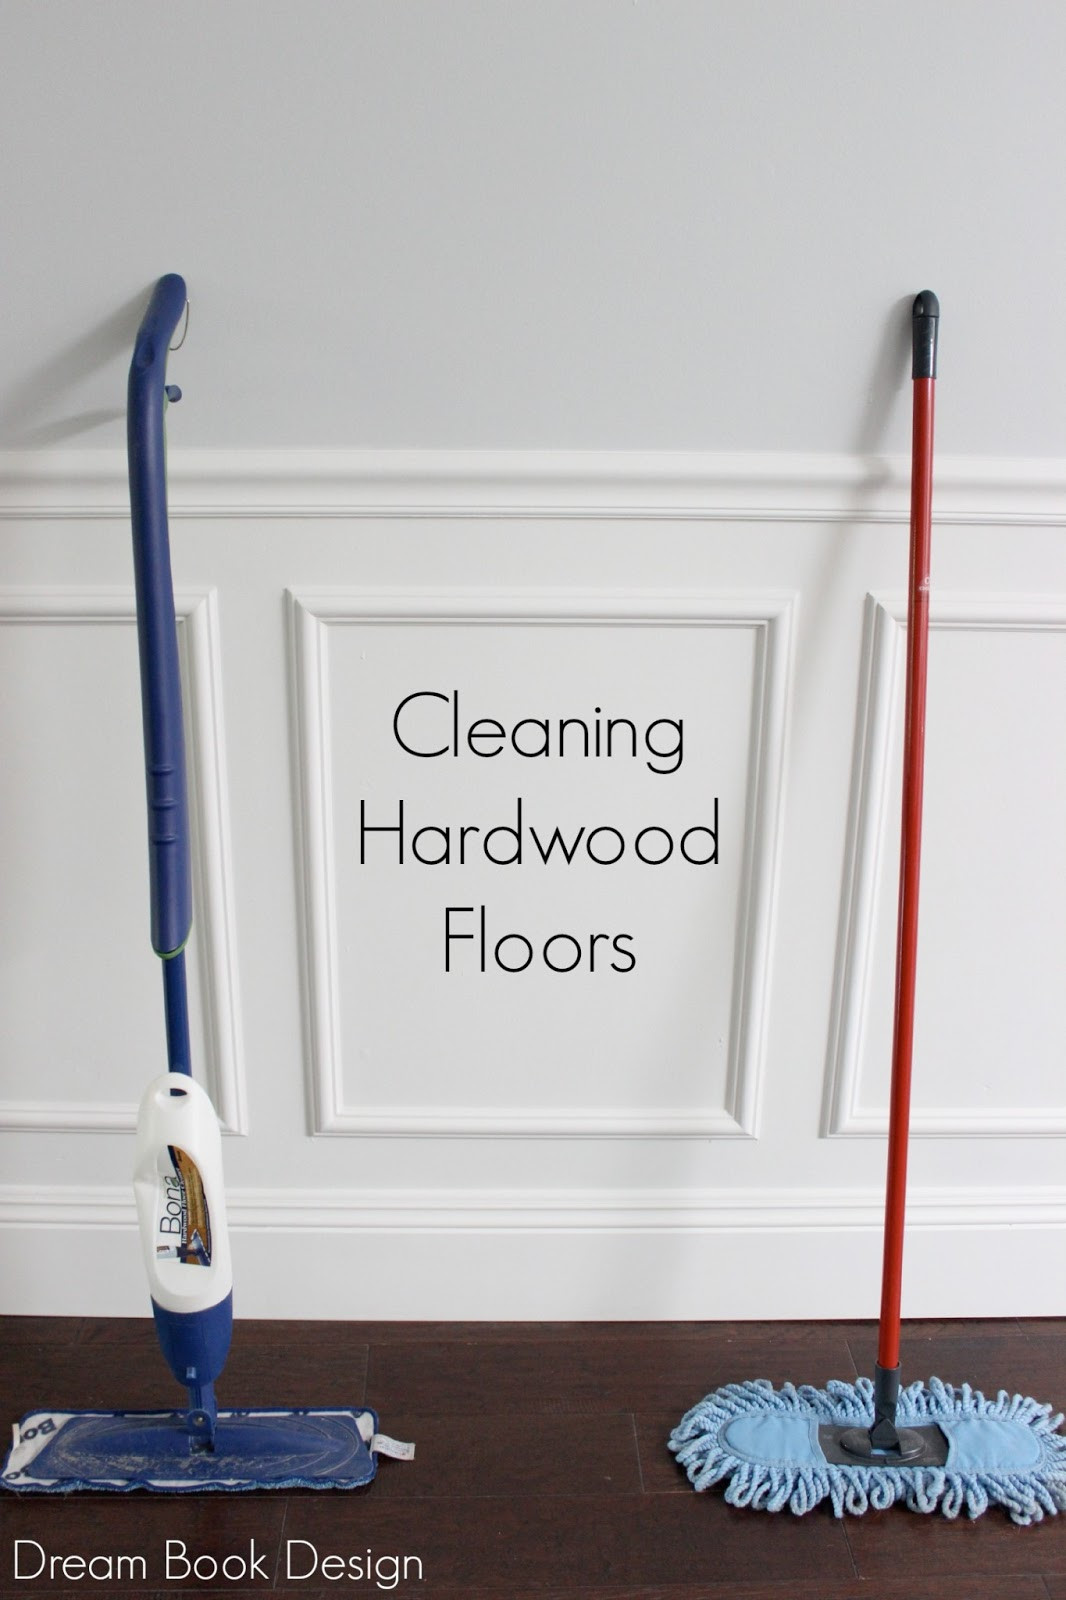 bruce hardwood floor cleaning pads of how do you clean laminate floors in your house best wire brushed regarding best way to clean hardwood floors rachael edwards a· wanaka wood floors bona spray mop cleaning kit